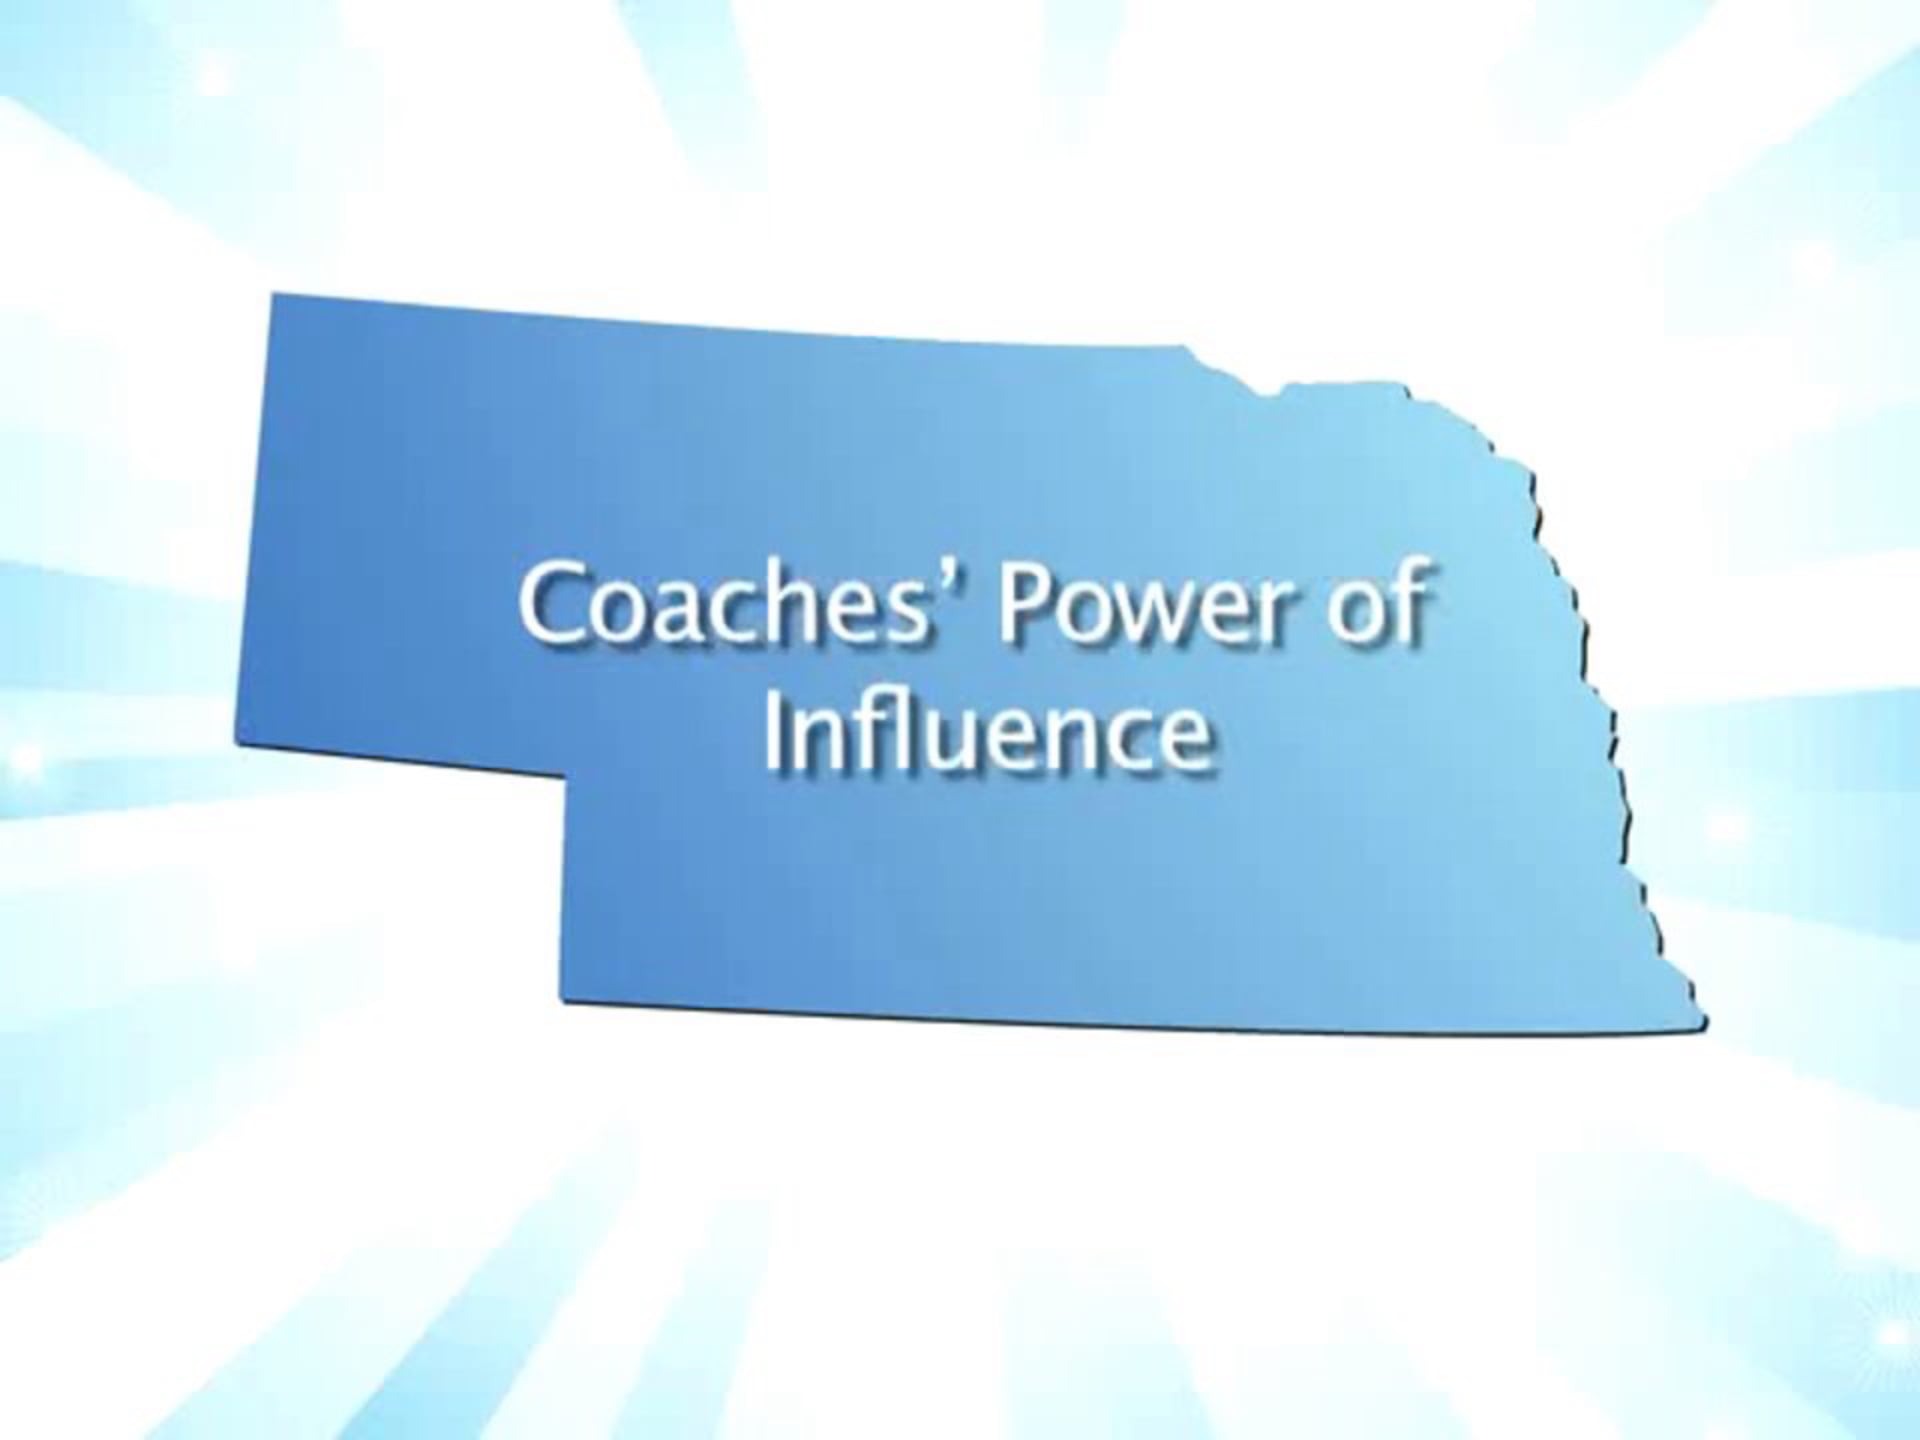 Coaching Beyond the Game, October 2013: Coaches’ Power of Influence